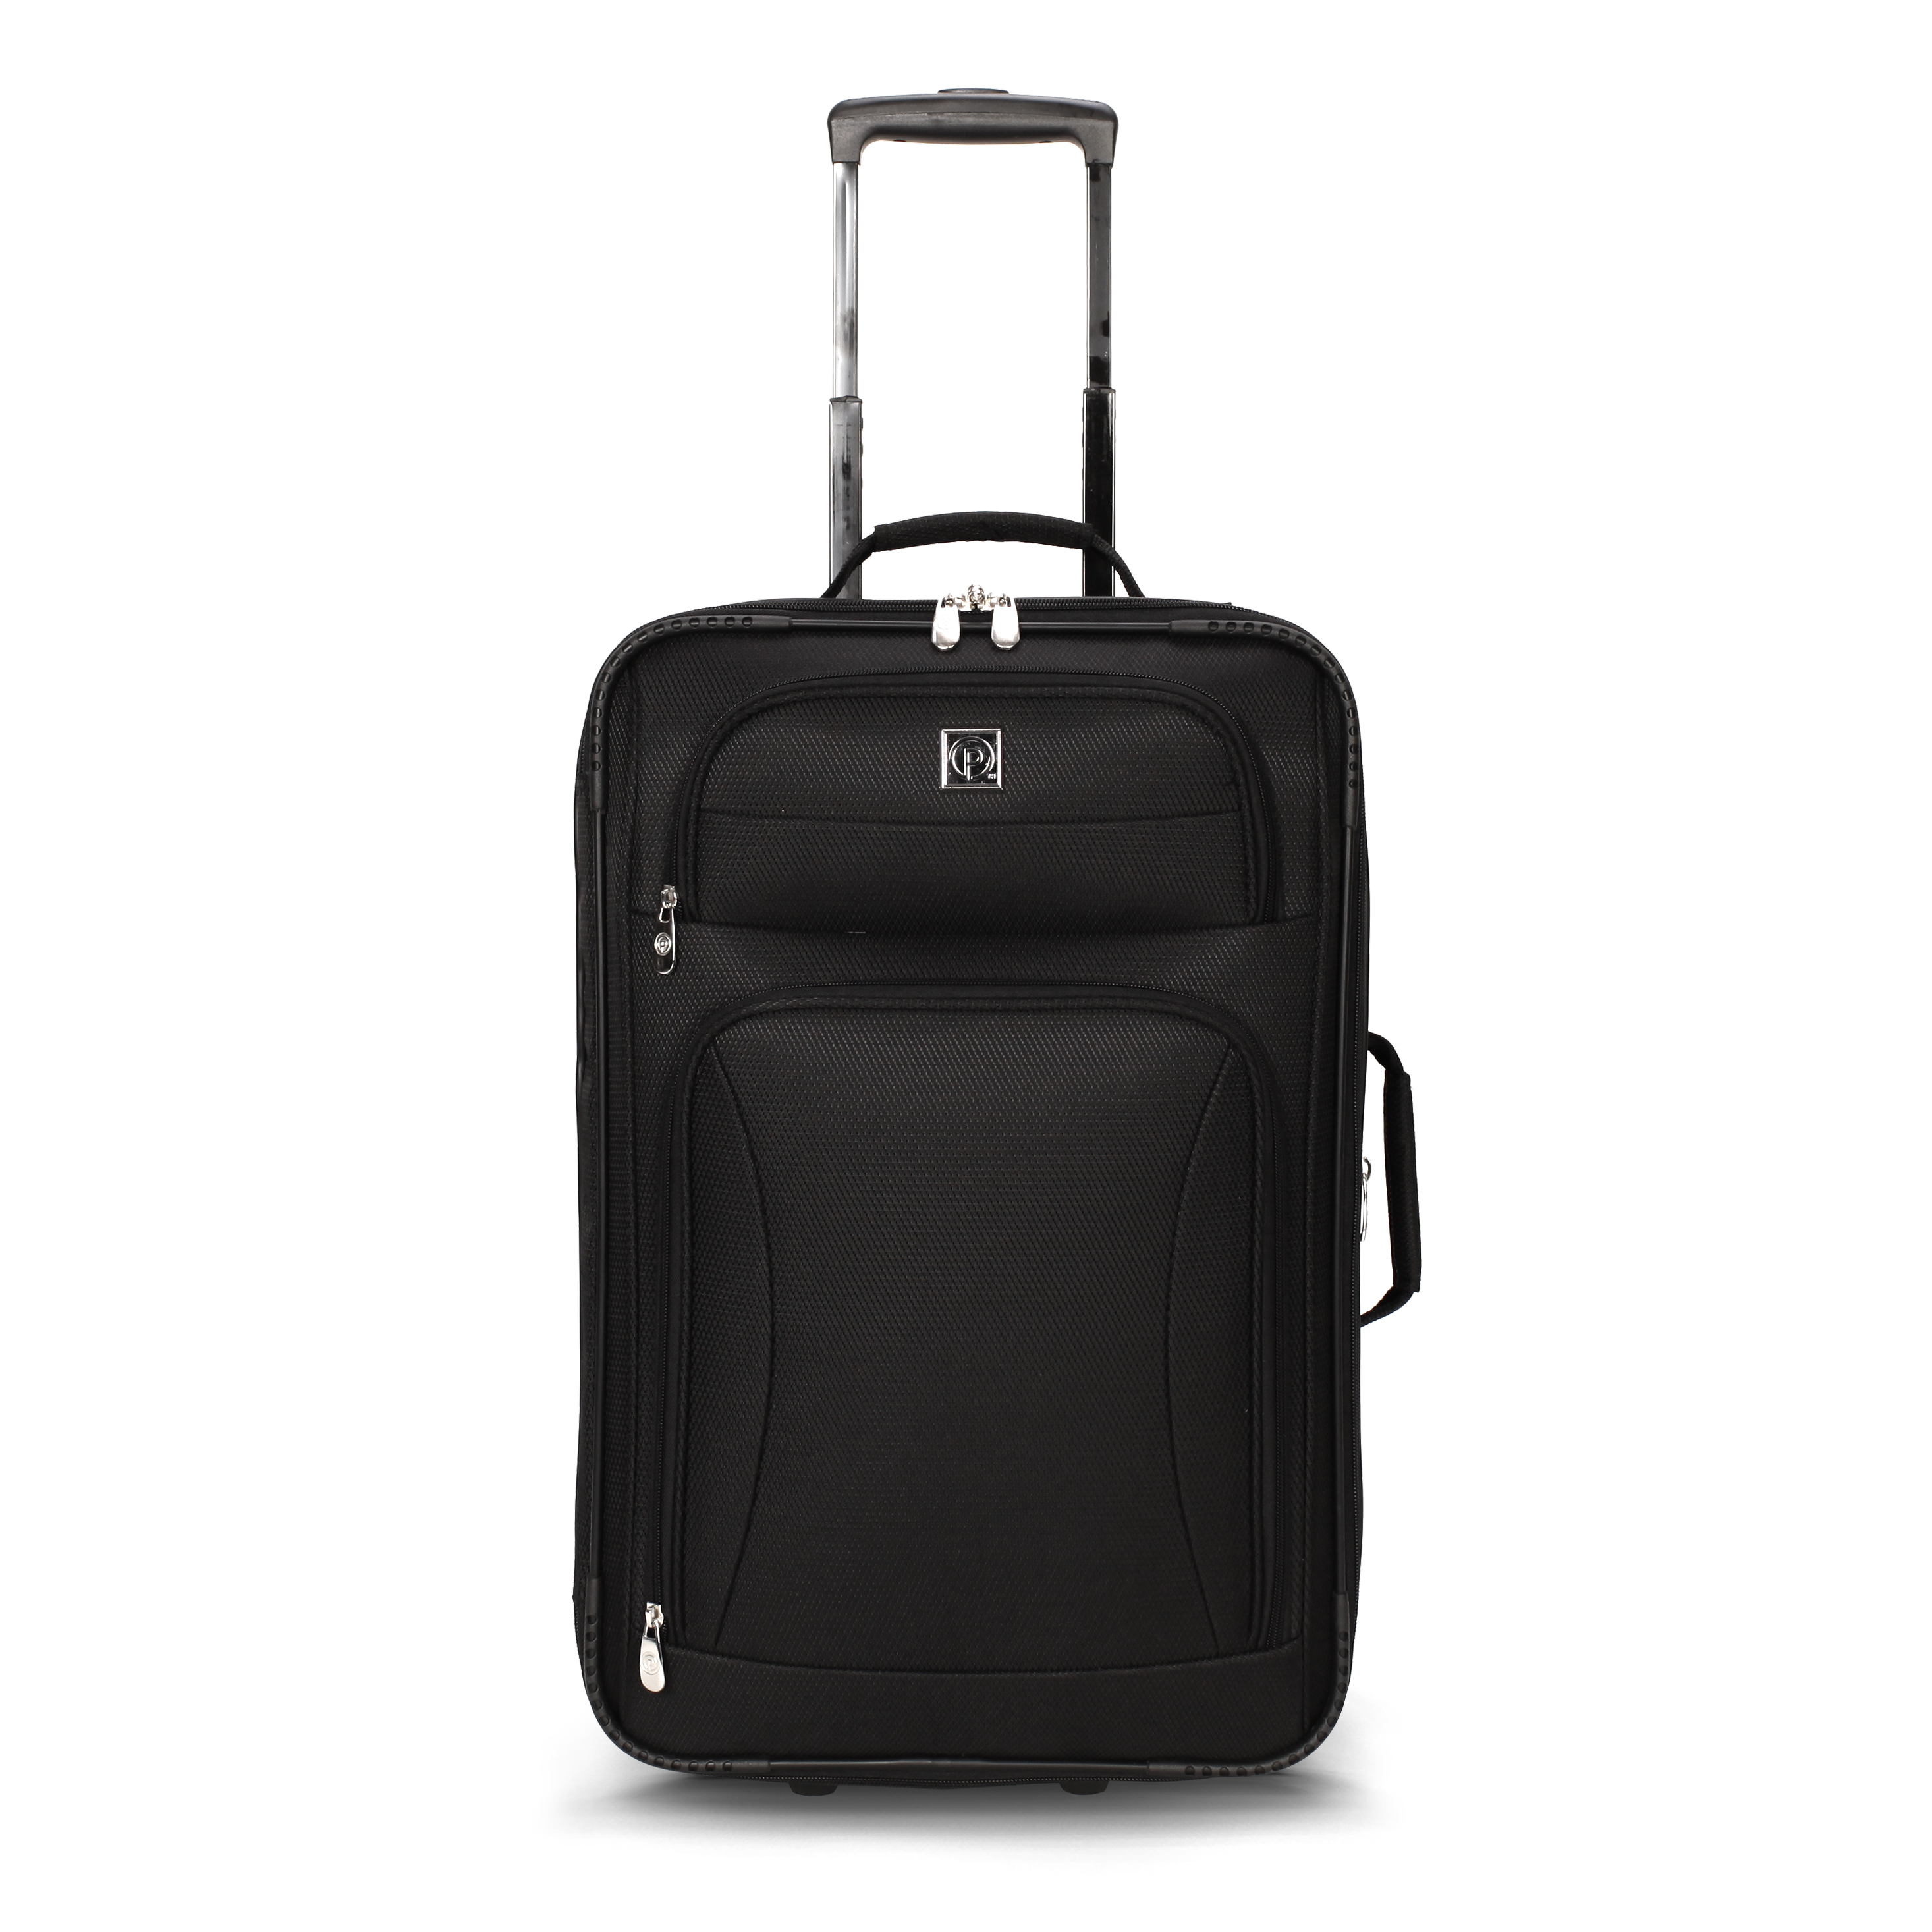 Protege 21" Regency Carry-on 2-Wheel Upright Luggage (Walmart Exclusive), Black - image 3 of 5